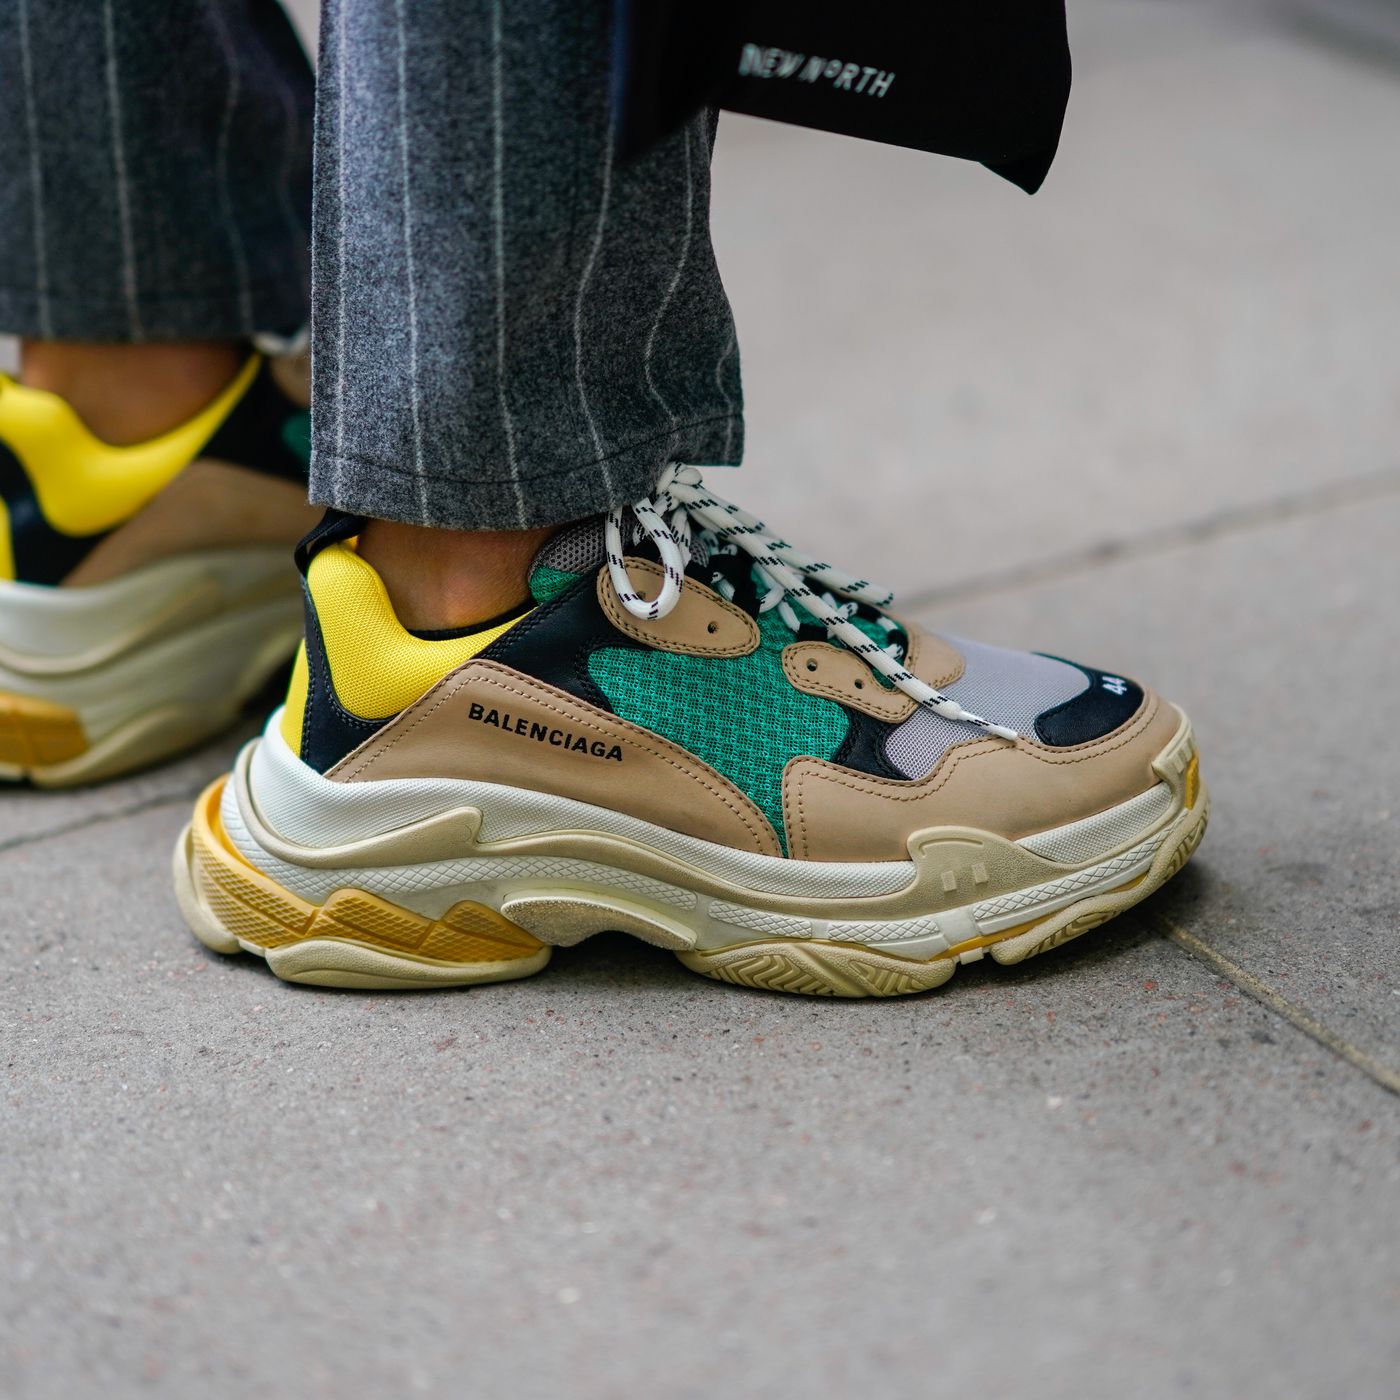 As Yeezys and Balenciaga Sneakers Surge, Preppy Shoes Are Less Popular -